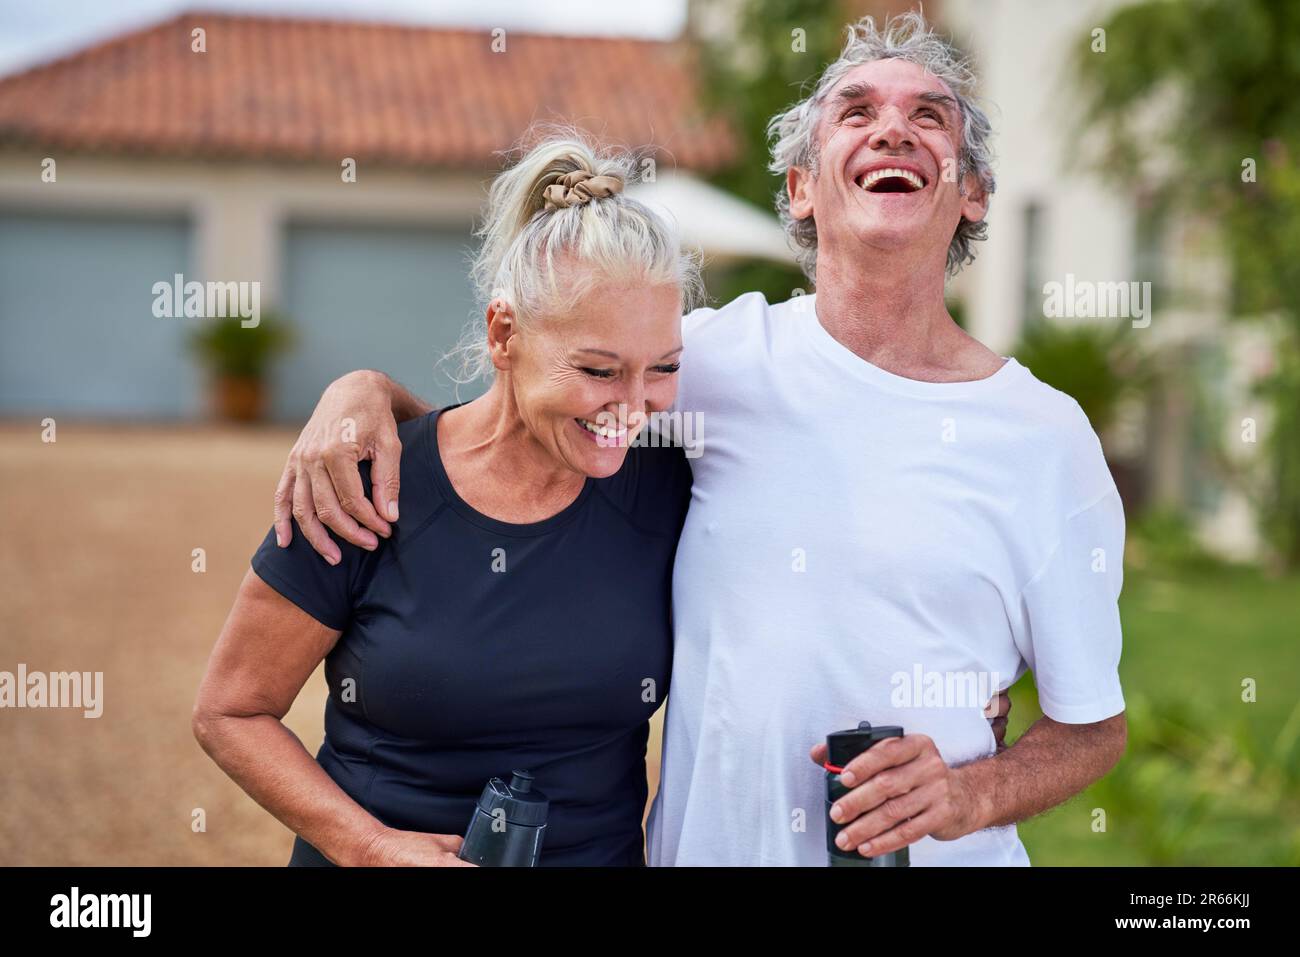 Happy, carefree senior couple with water bottles laughing Stock Photo